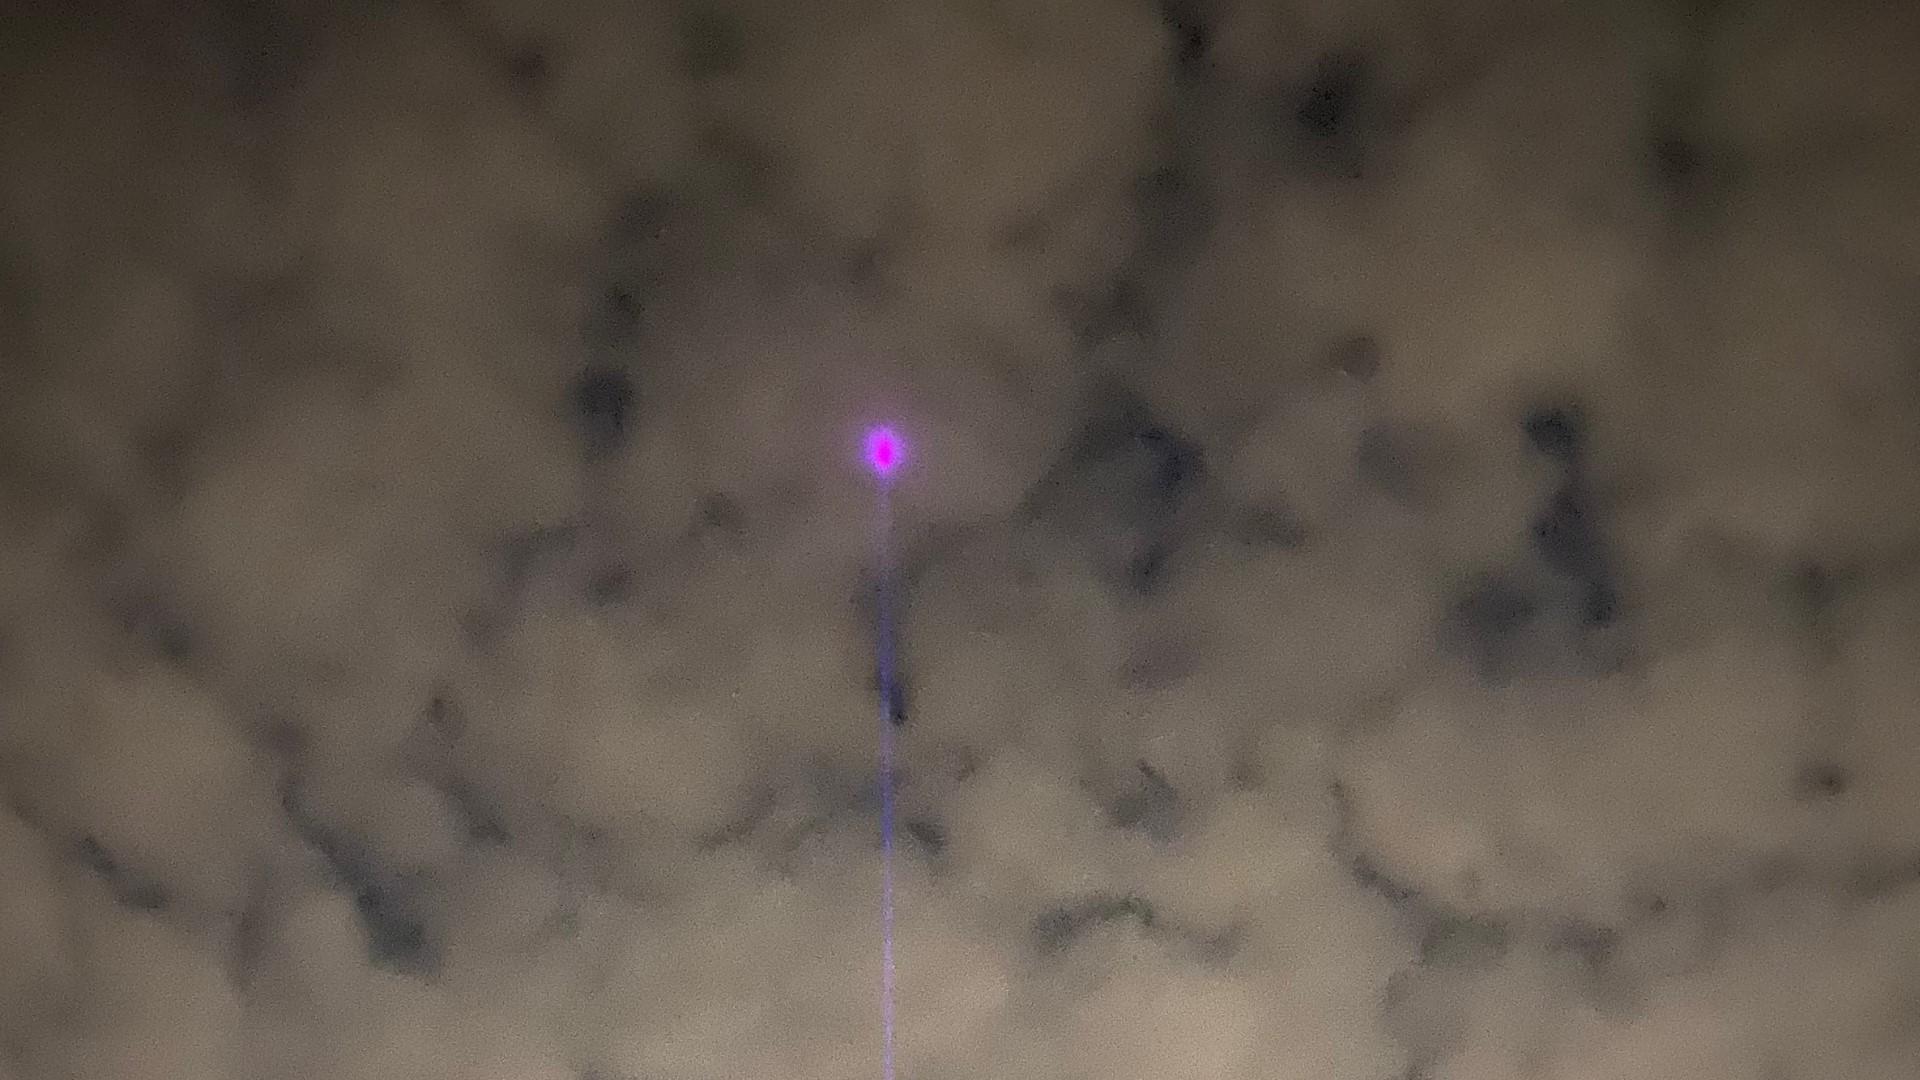 A purple light in the sky over Sacramento has been drawing a lot of attention from people out on Halloween night.